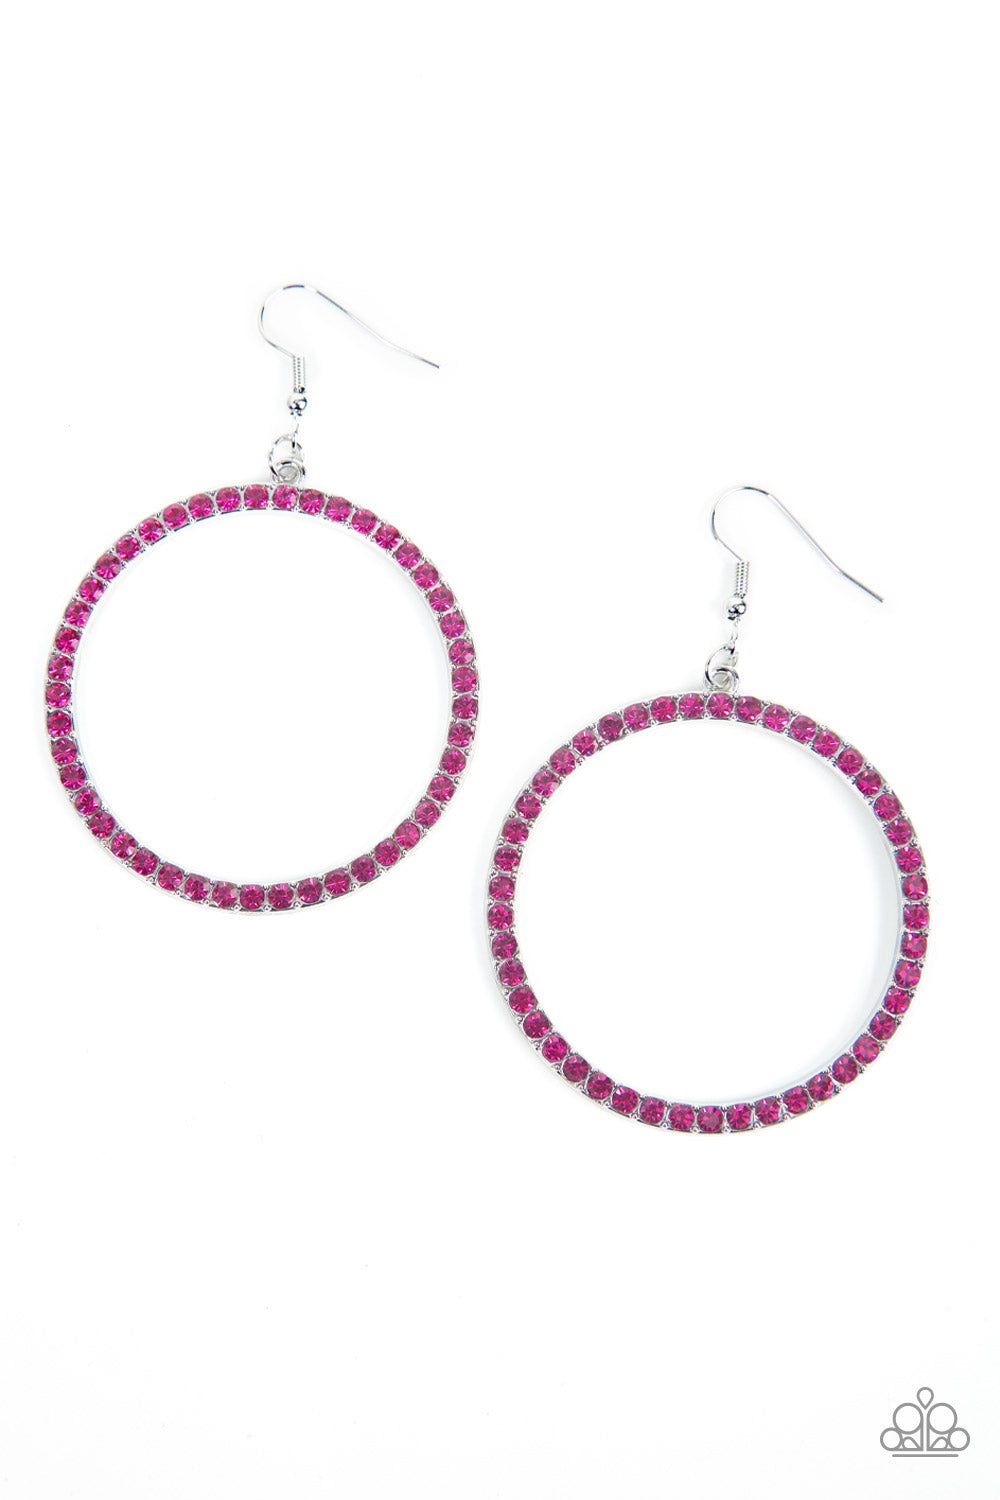 Head-Turning Halo Pink Earring - Paparazzi Accessories  The front of an oversized silver ring is encrusted in glitzy Fuchsia Fedora rhinestones, resulting in a head-turning hoop. Earring attaches to a standard fishhook fitting.  Sold as one pair of earrings.